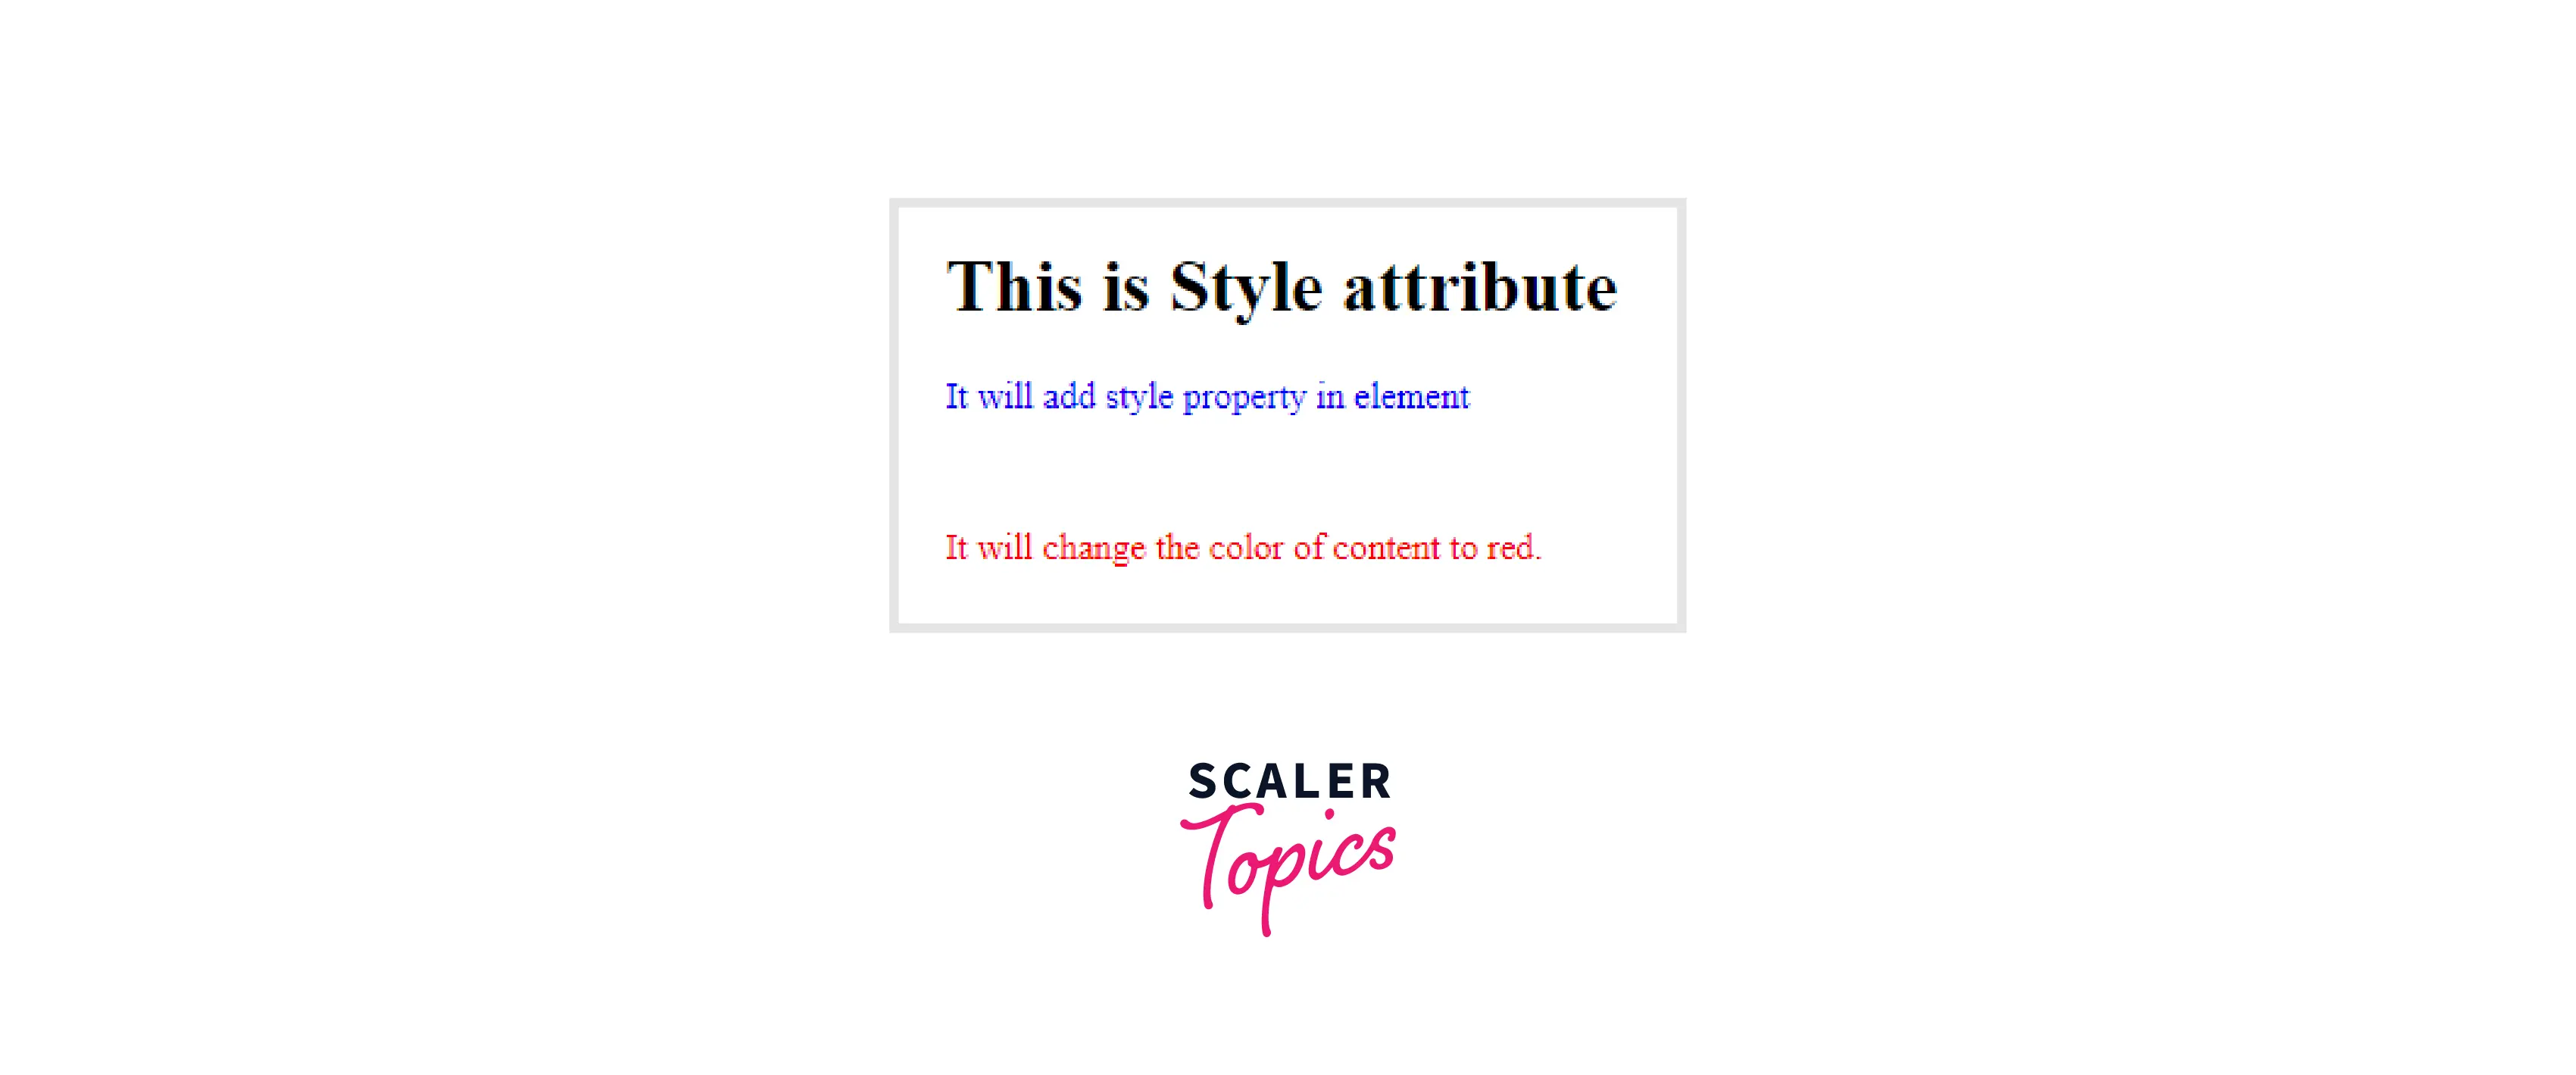 STYLE ATTRIBUTE OUTPUT